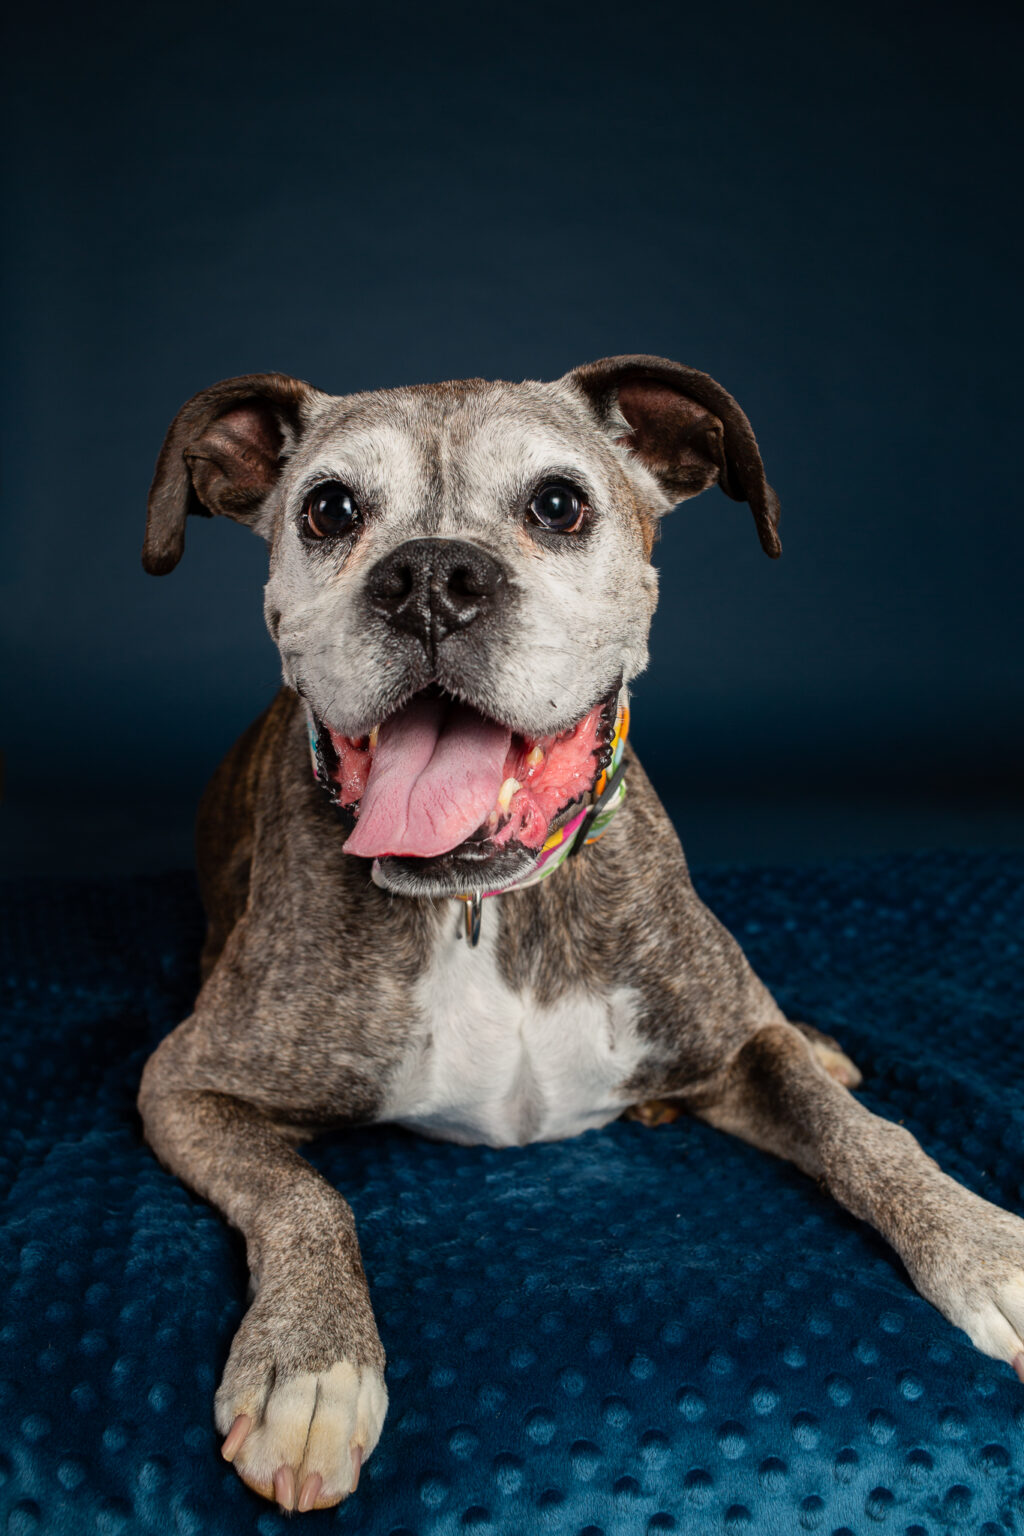 White faced brindle boxer breed dog laying down facing the viewer with pink tongue hanging out slightly to the left, against a dark blue background.